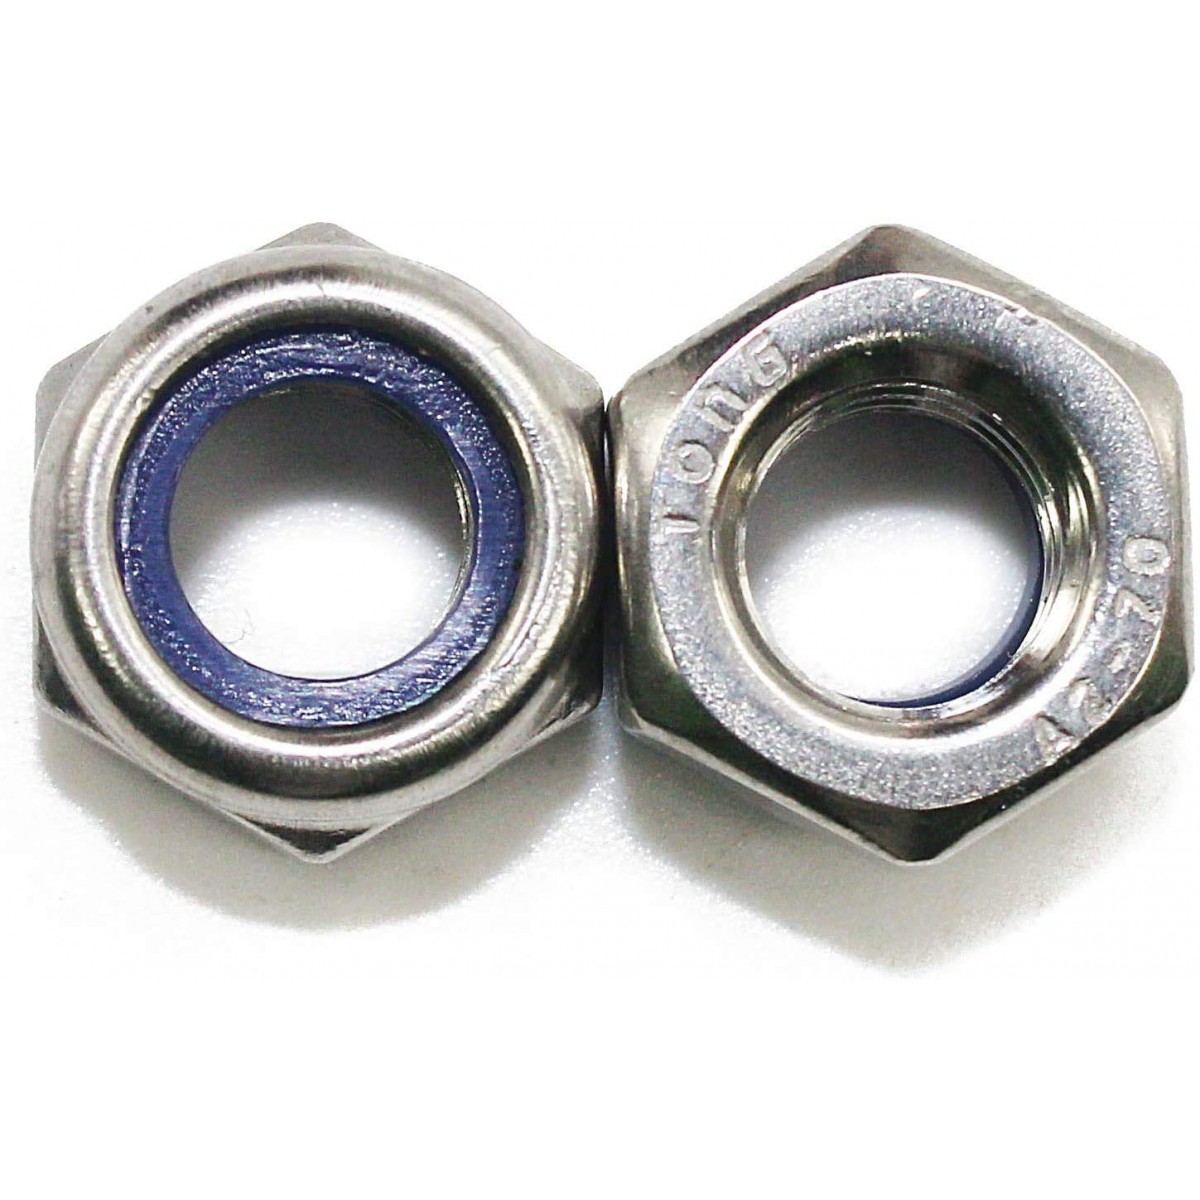 M8 8mm Hexagon Nyloc Nylon Insert Lock Nuts A2 Stainless Steel Type T DIN 985 